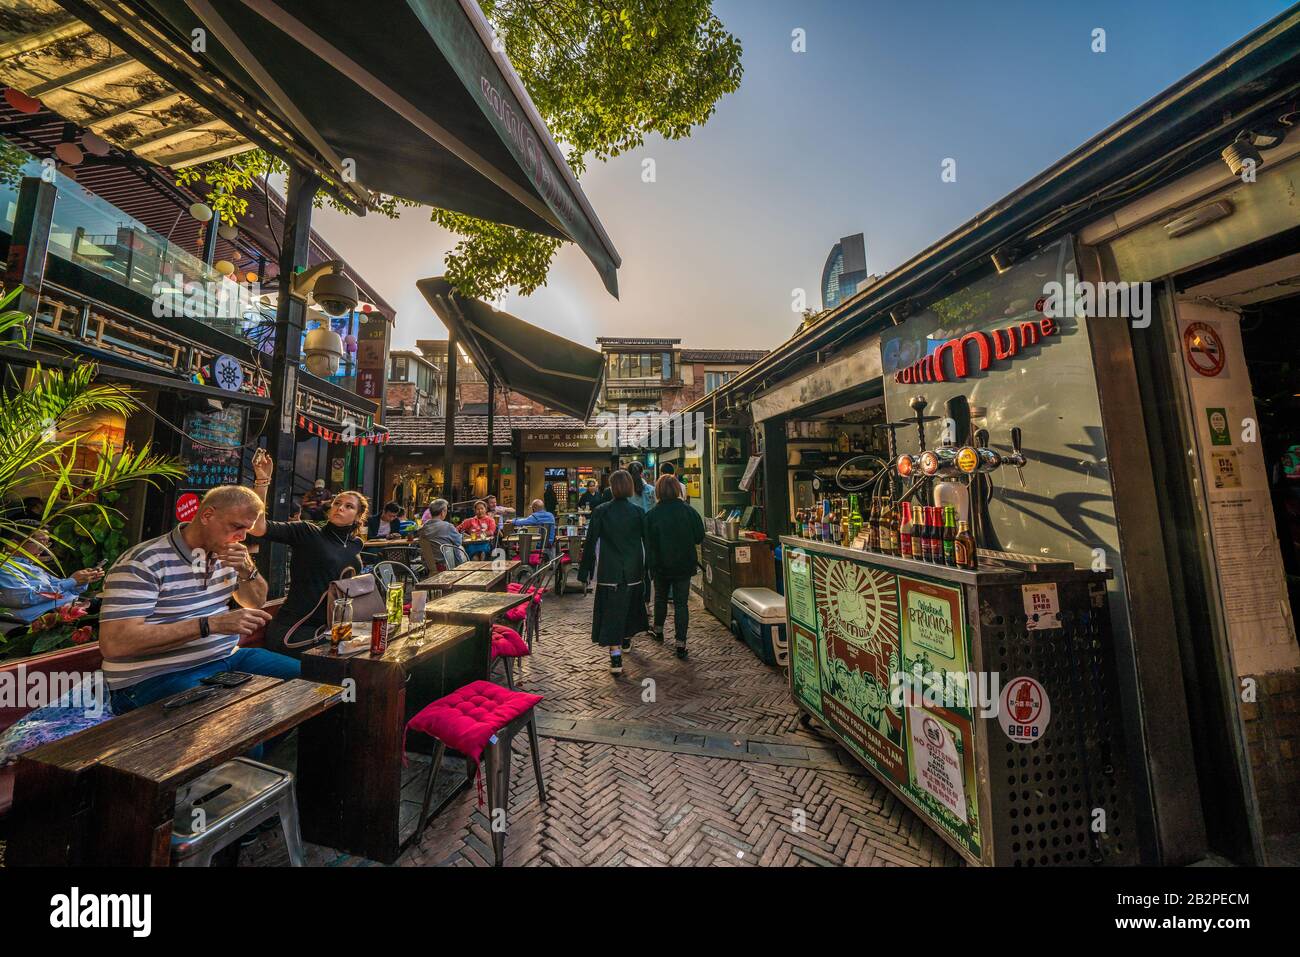 SHANGHAI, CHINA, OCTOBER 31: Bars and cafes in the Tianzifang shopping area, a popular tourist destination on October 31, 2019 in Shanghai Stock Photo